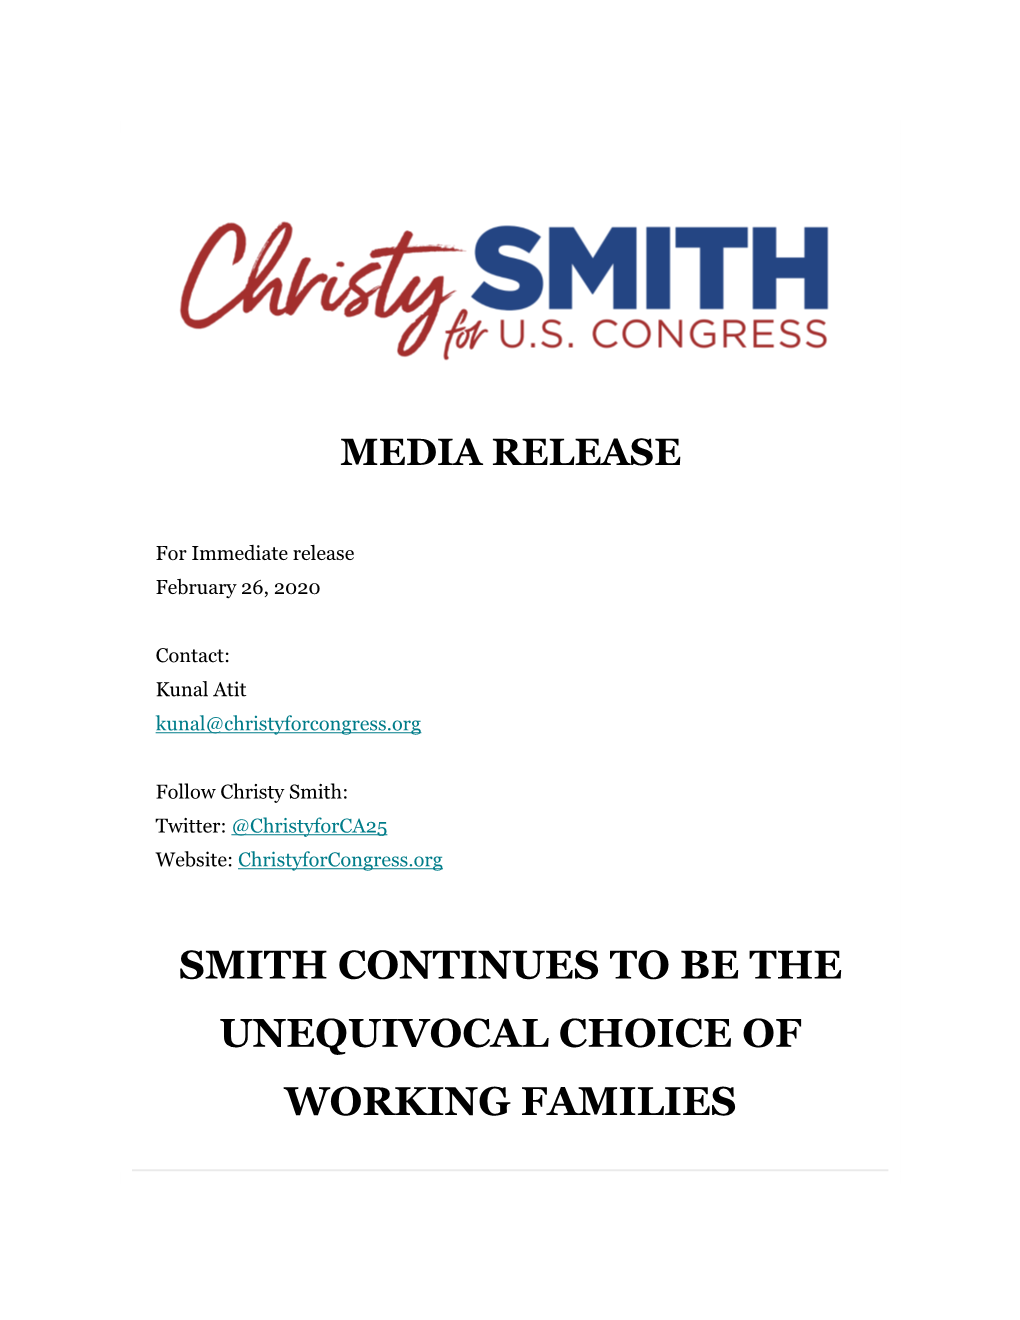 Smith Continues to Be the Unequivocal Choice Of